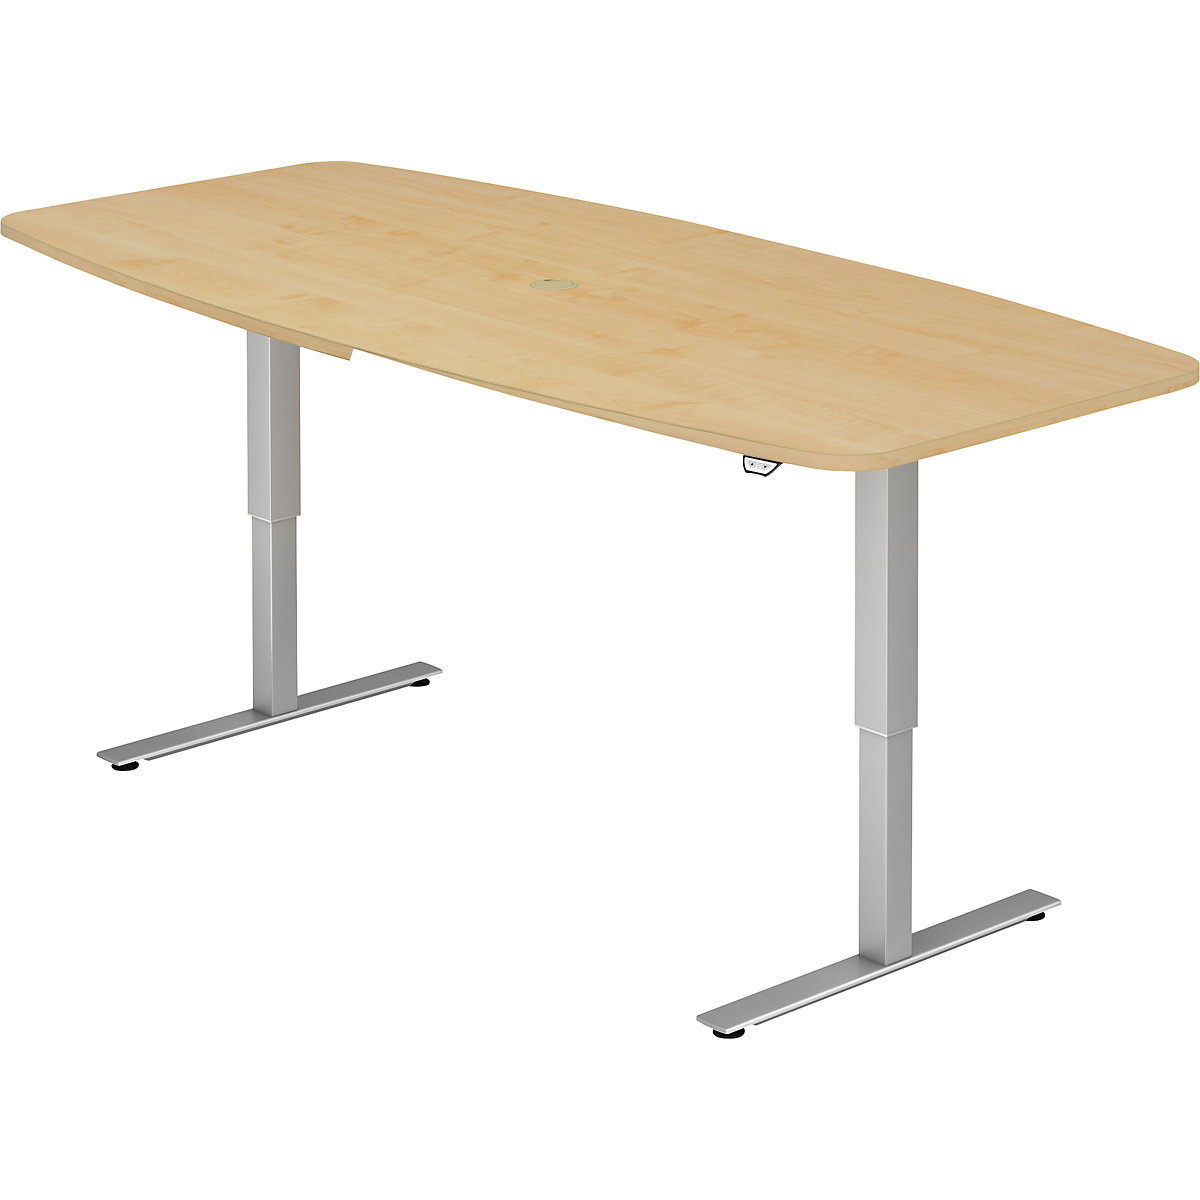 Conference table, WxD 2200 x 1030 mm, electric height adjustment from 720 – 1190 mm, maple finish-4